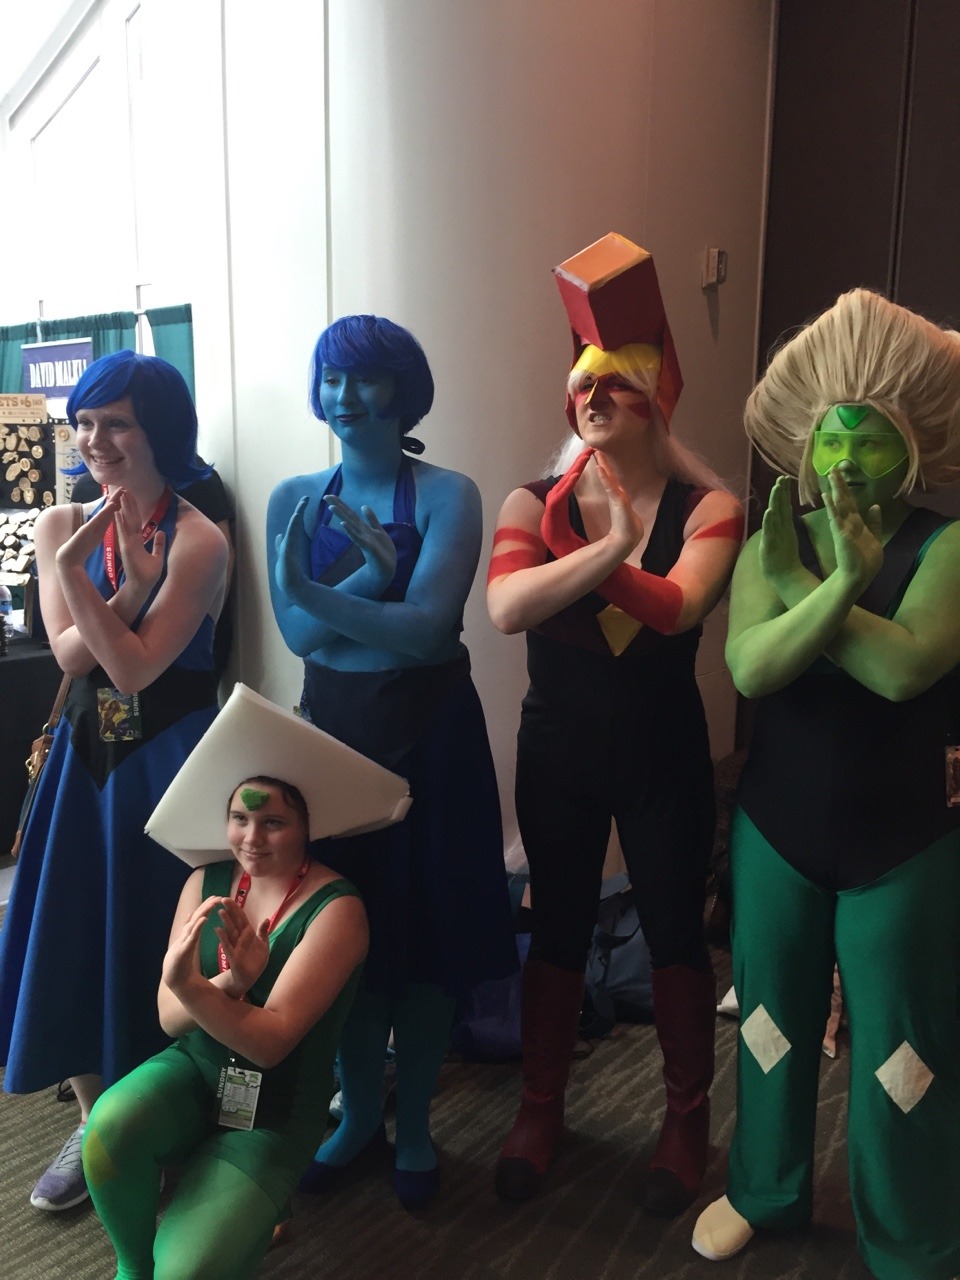 Holy cow, what an amazing final day for #eccc2017!!! Me as peridot, @modernmadkat as Lapis